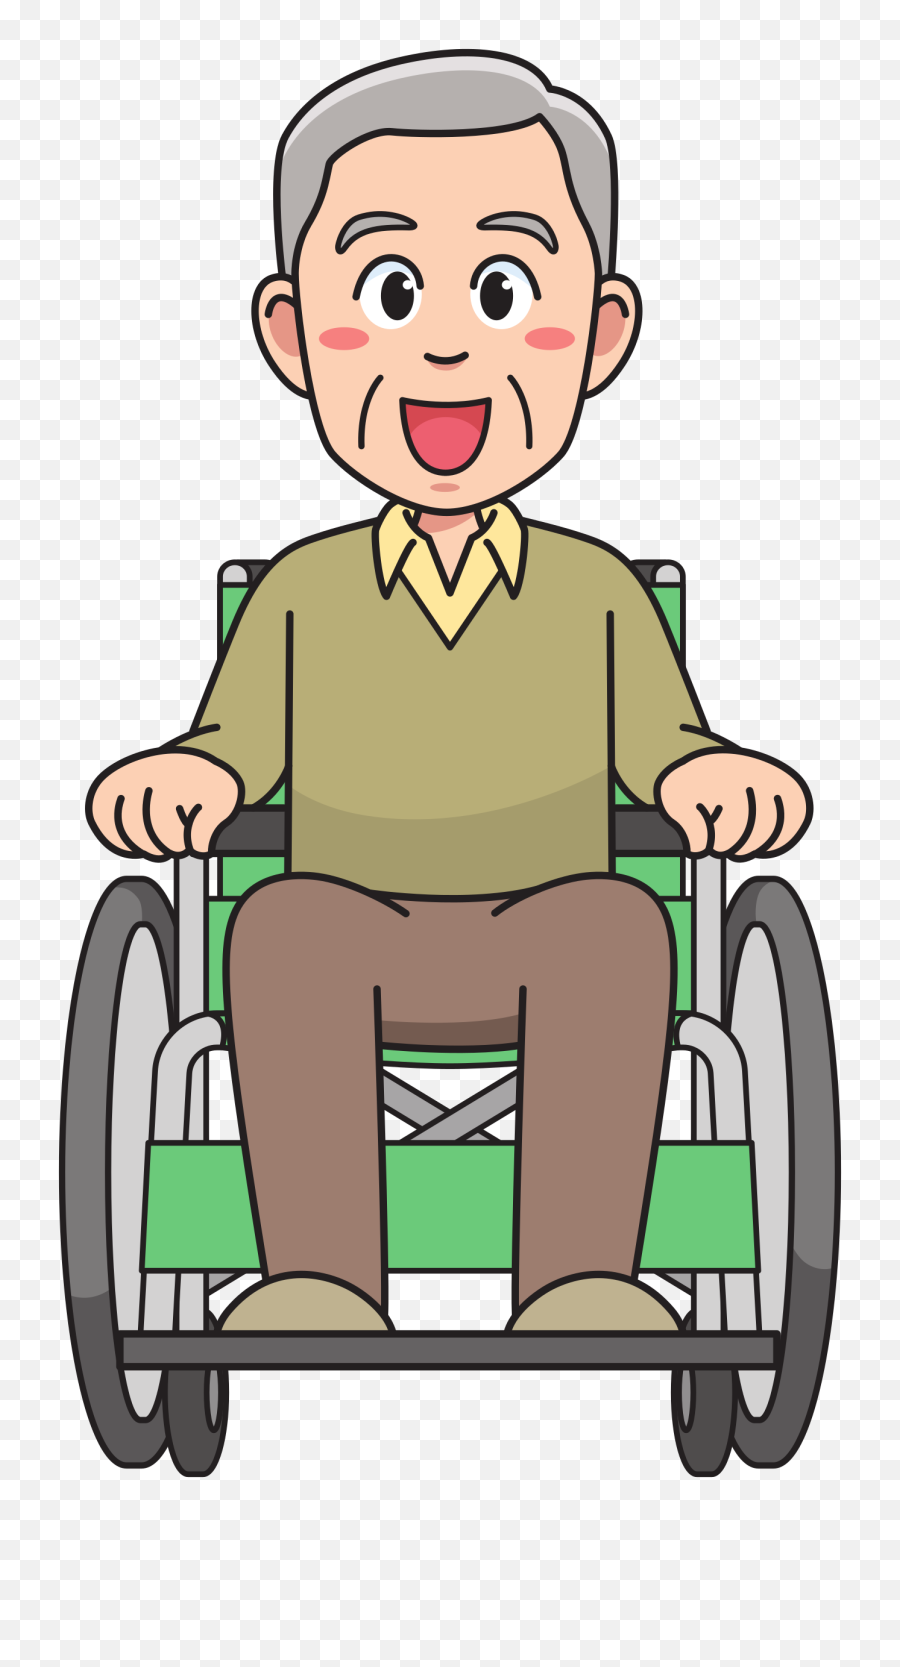 Jpg Royalty Free Library Png Files - Cartoon Person In Wheelchair,Wheelchair Transparent